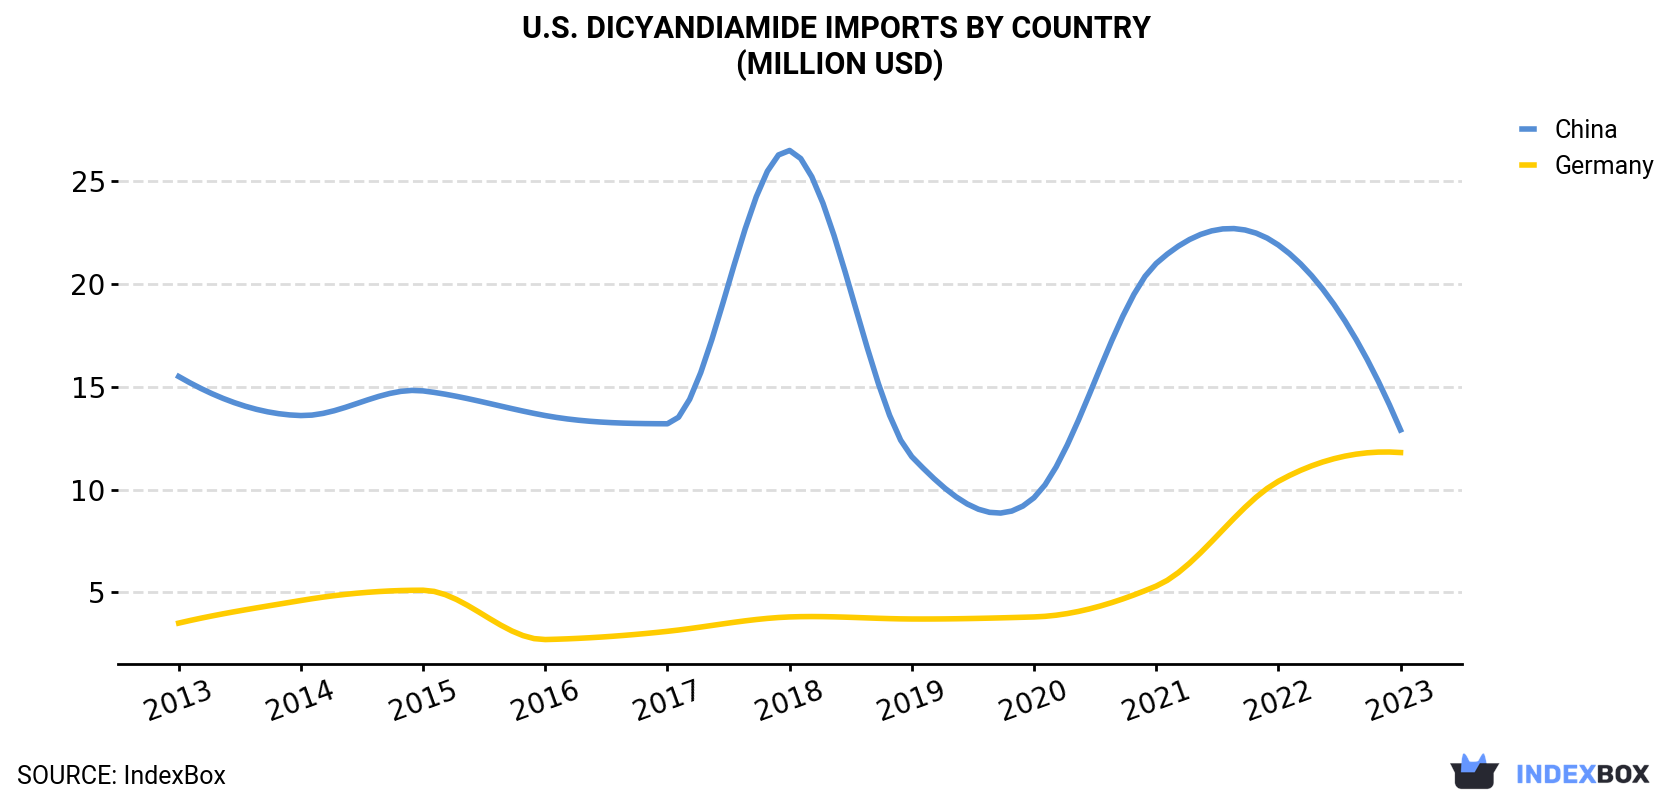 U.S. Dicyandiamide Imports By Country (Million USD)